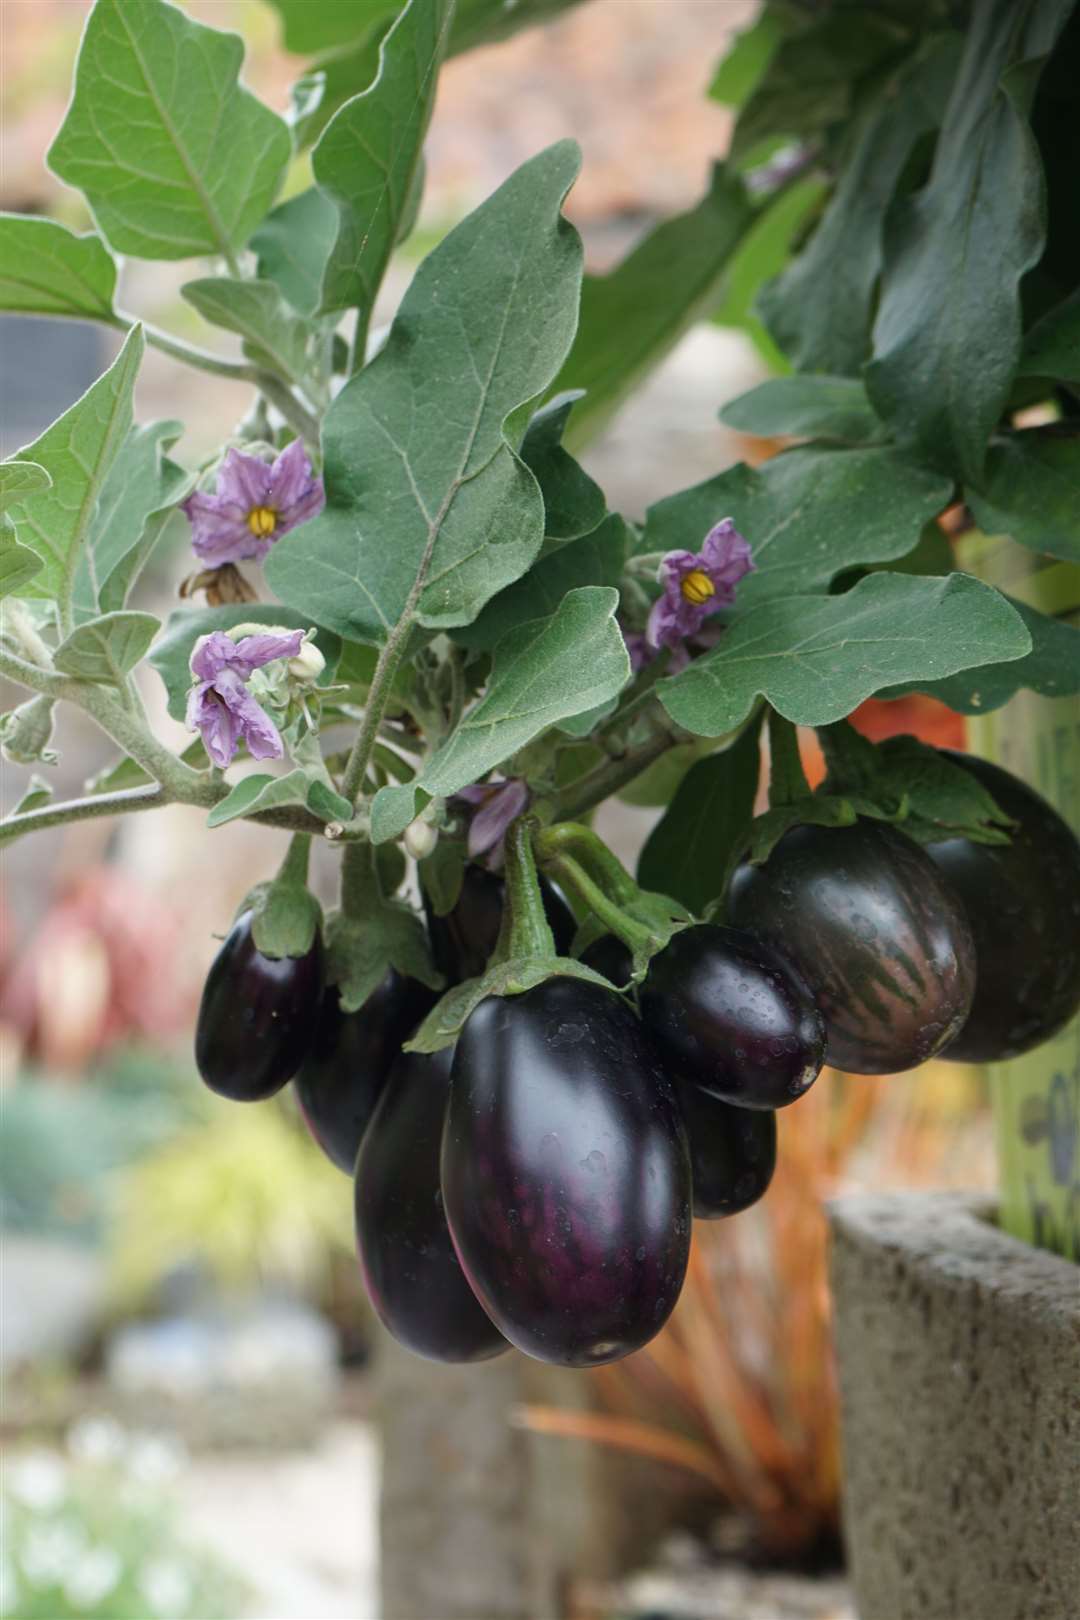 'Baby Rosanna' aubergines in a pot. Picture: Tom Harris/PA